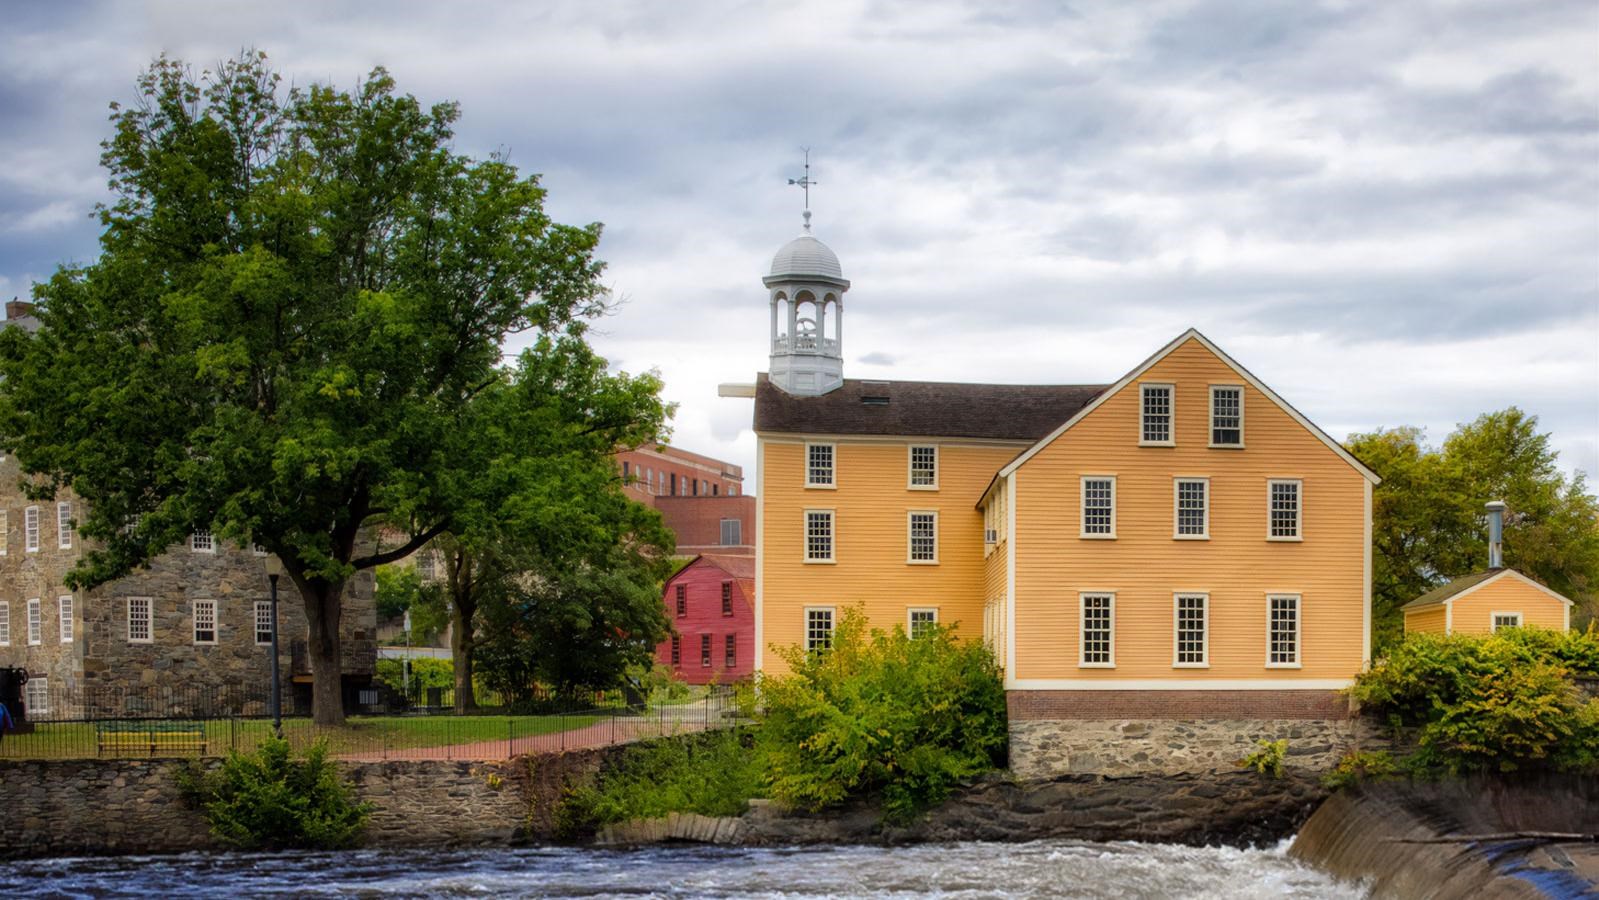 Cloudy day over looking the Wilkinson and Slater Mill buildings